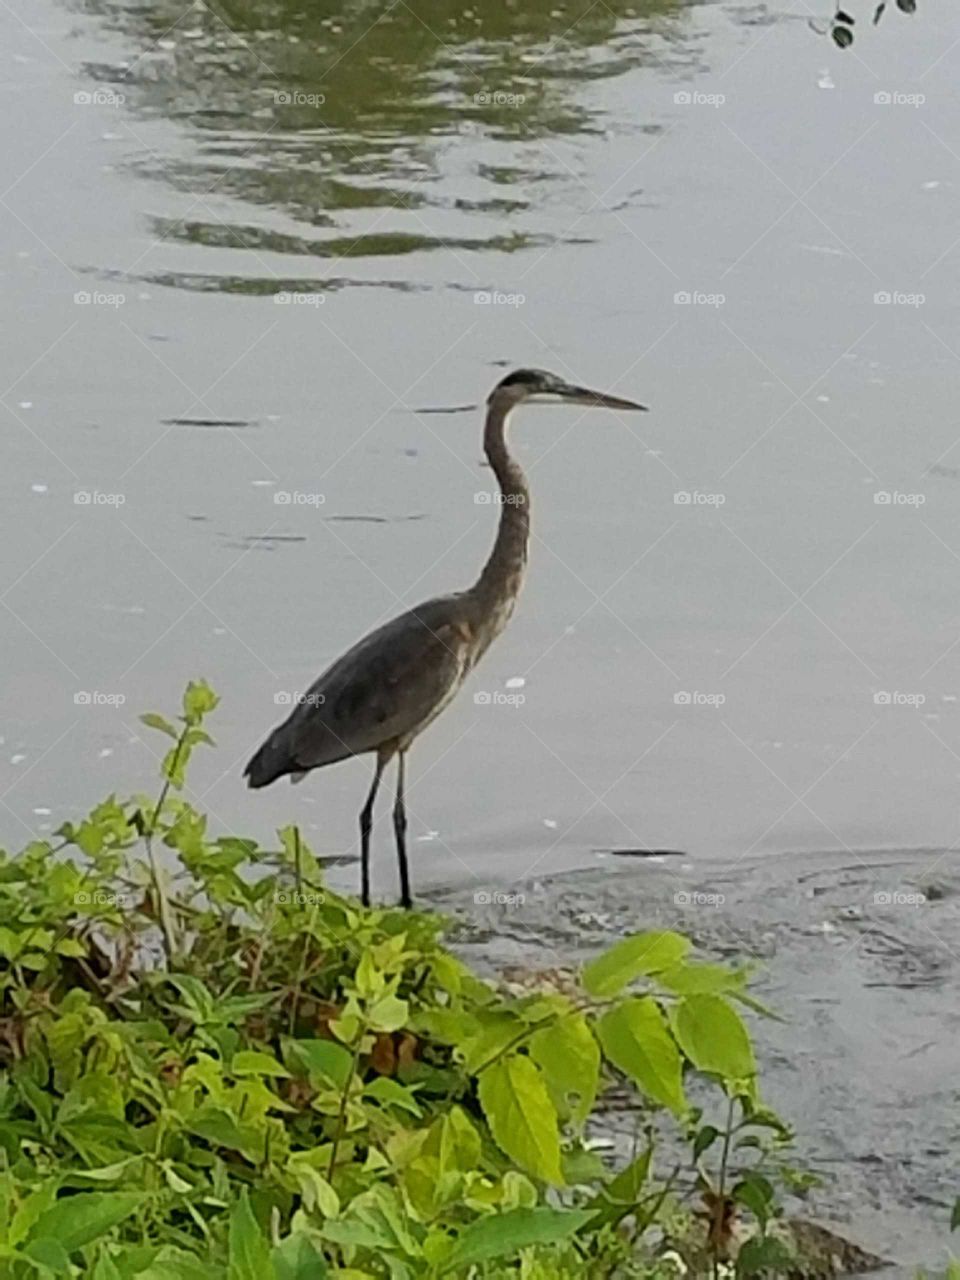 Heron on the Fox River in Illinois